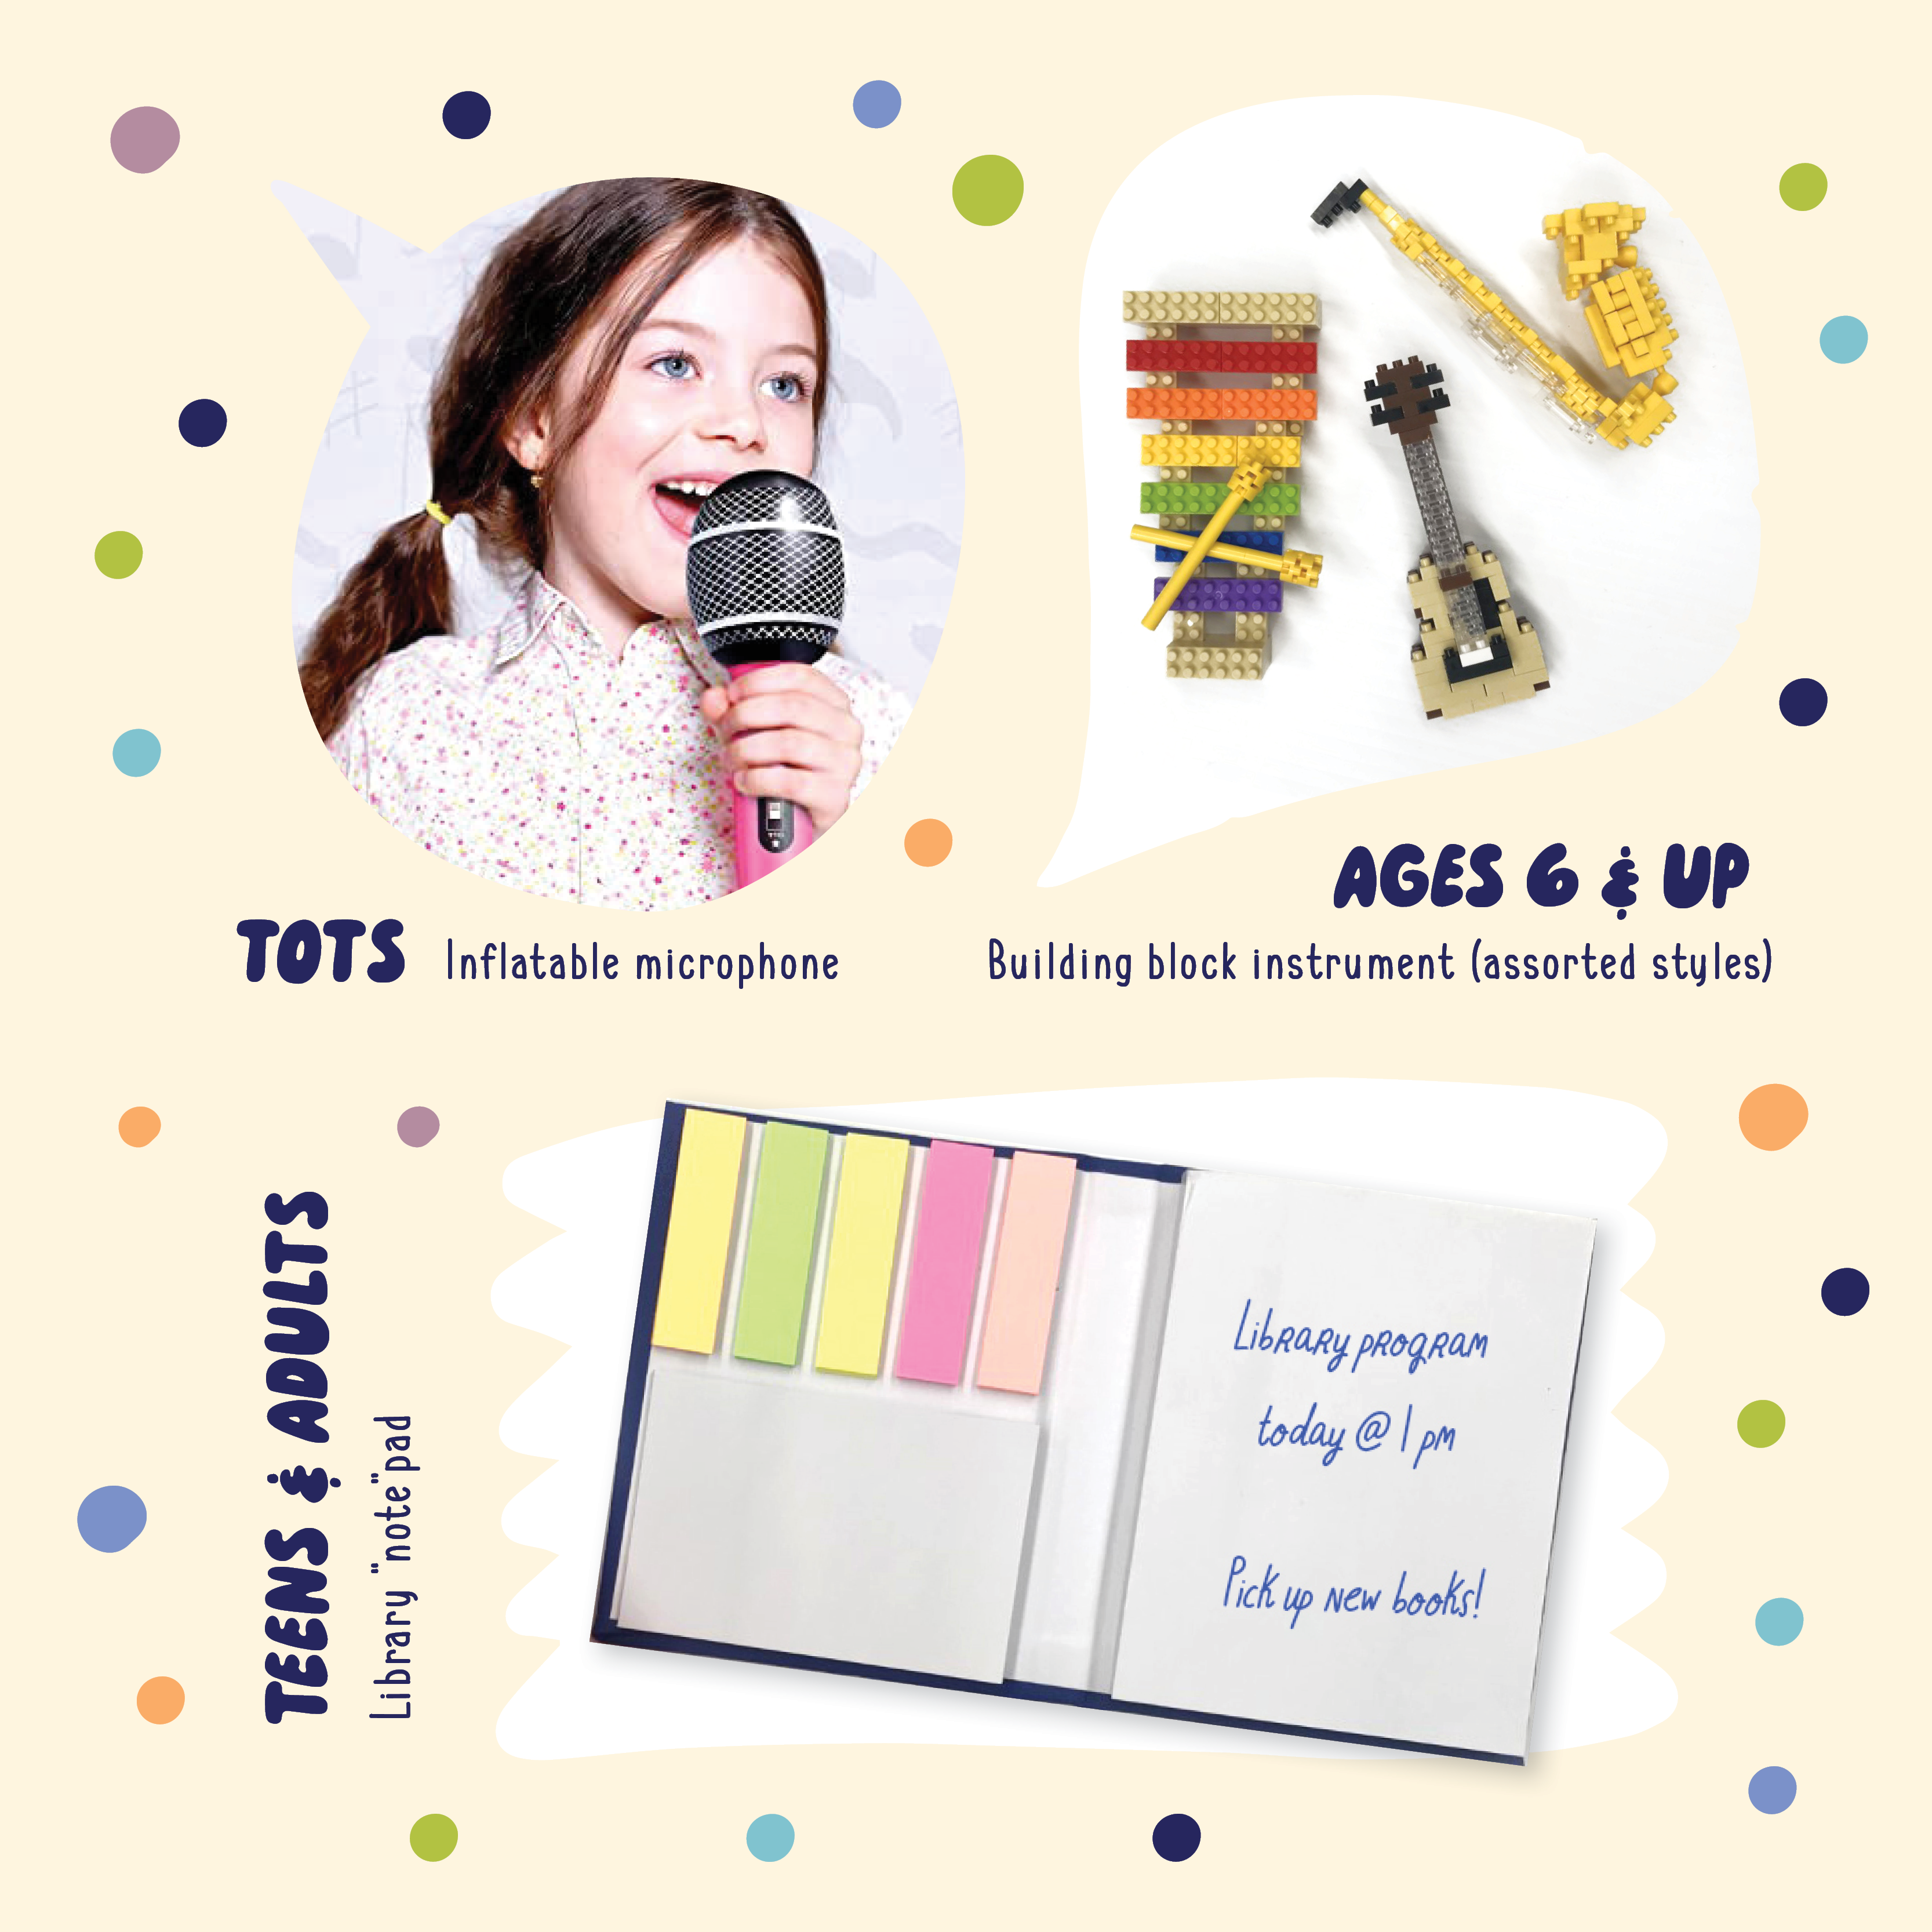 Tots - inflatable microphone; Ages 6 & up - Building block instrument (assorted styles); Teens & adults - Library "note"pad